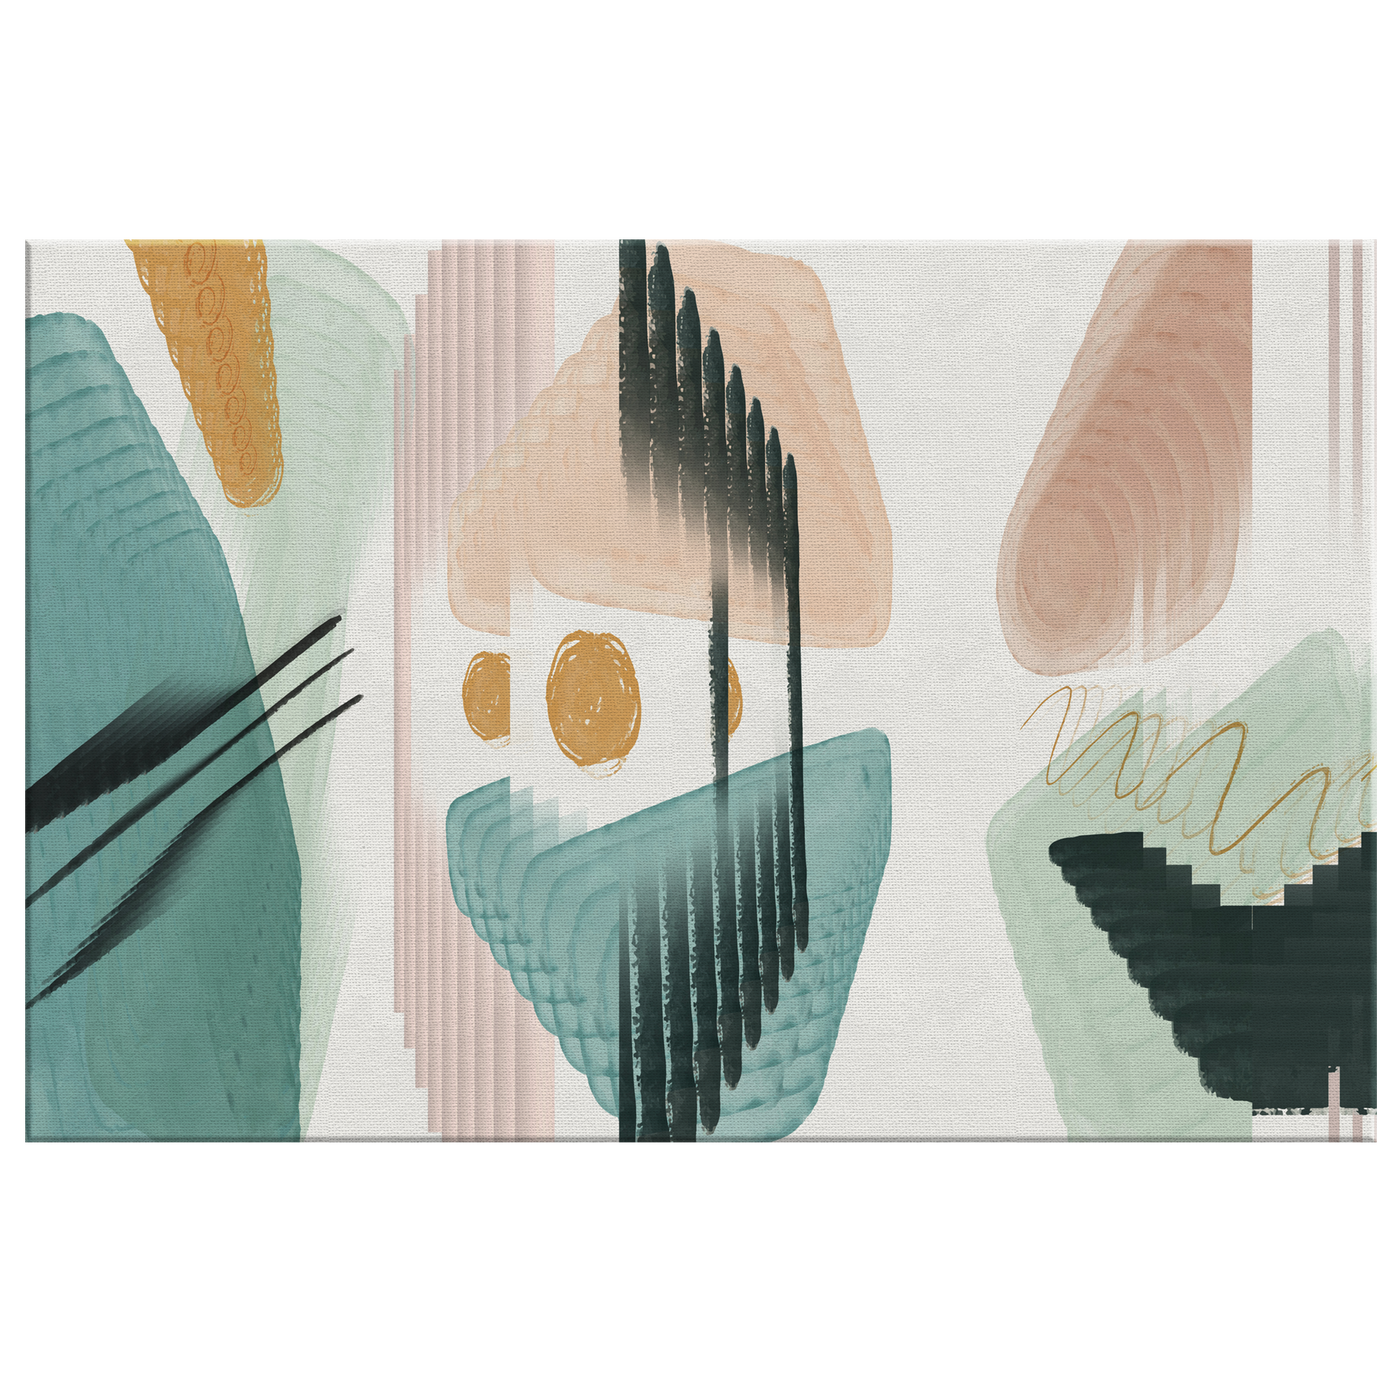 Abstract Shapes 169 Canvas Wrap